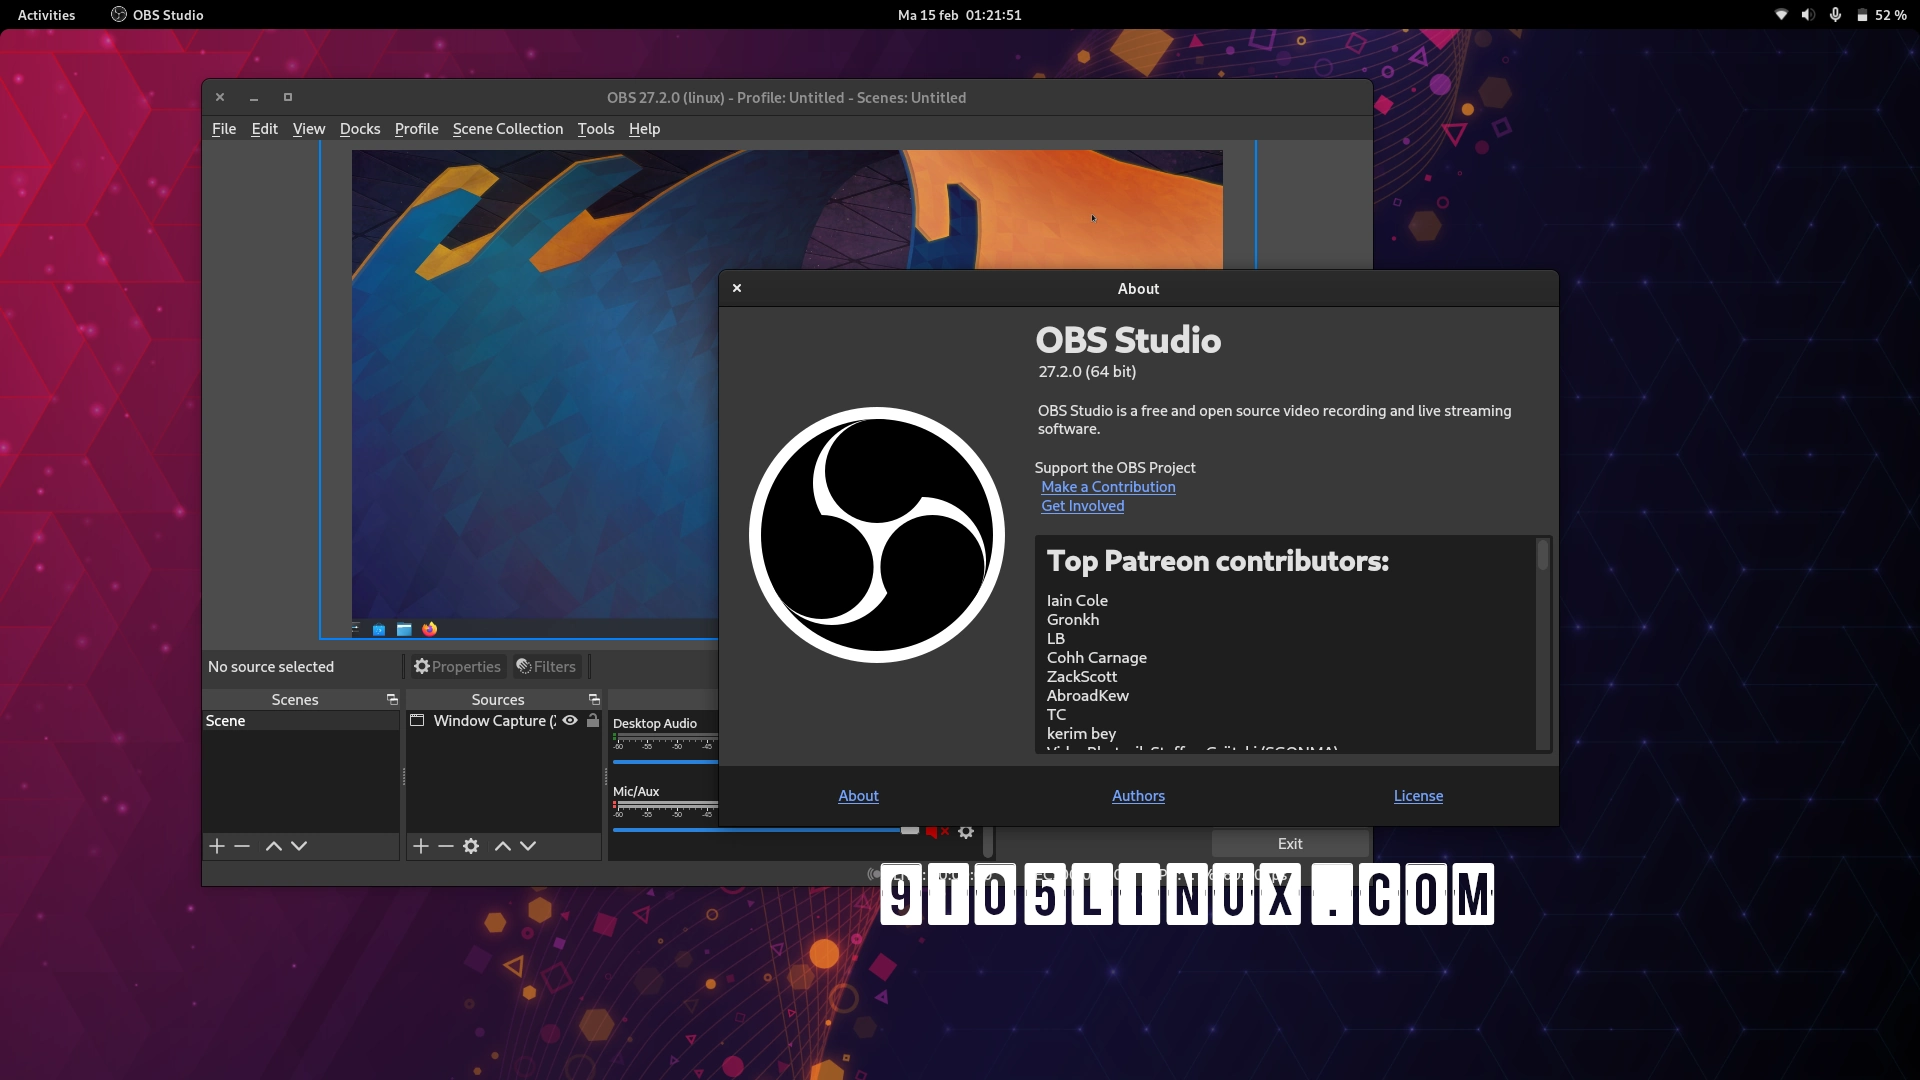 OBS Studio 27.2 Released with Official Flatpak Support, More Robust PipeWire Capturing